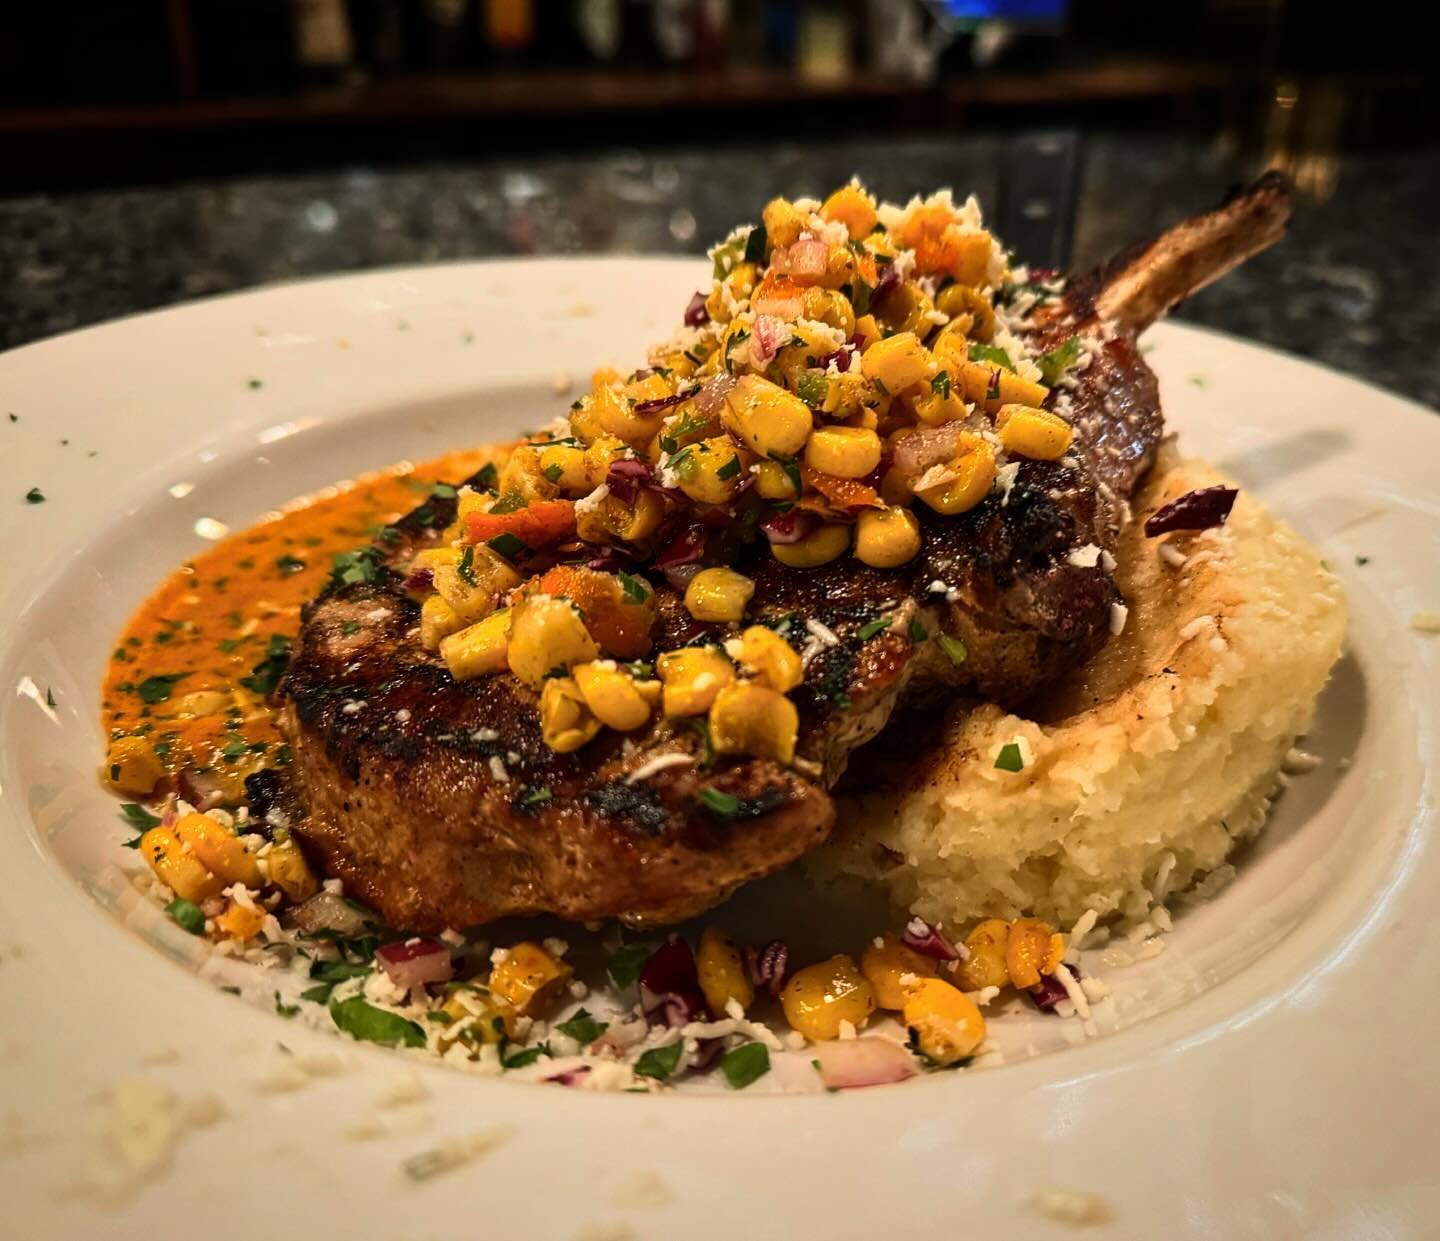 Bone-in pork chop special tonight! Grilled and topped with chipotle cream sauce and corn salsa. 🤩